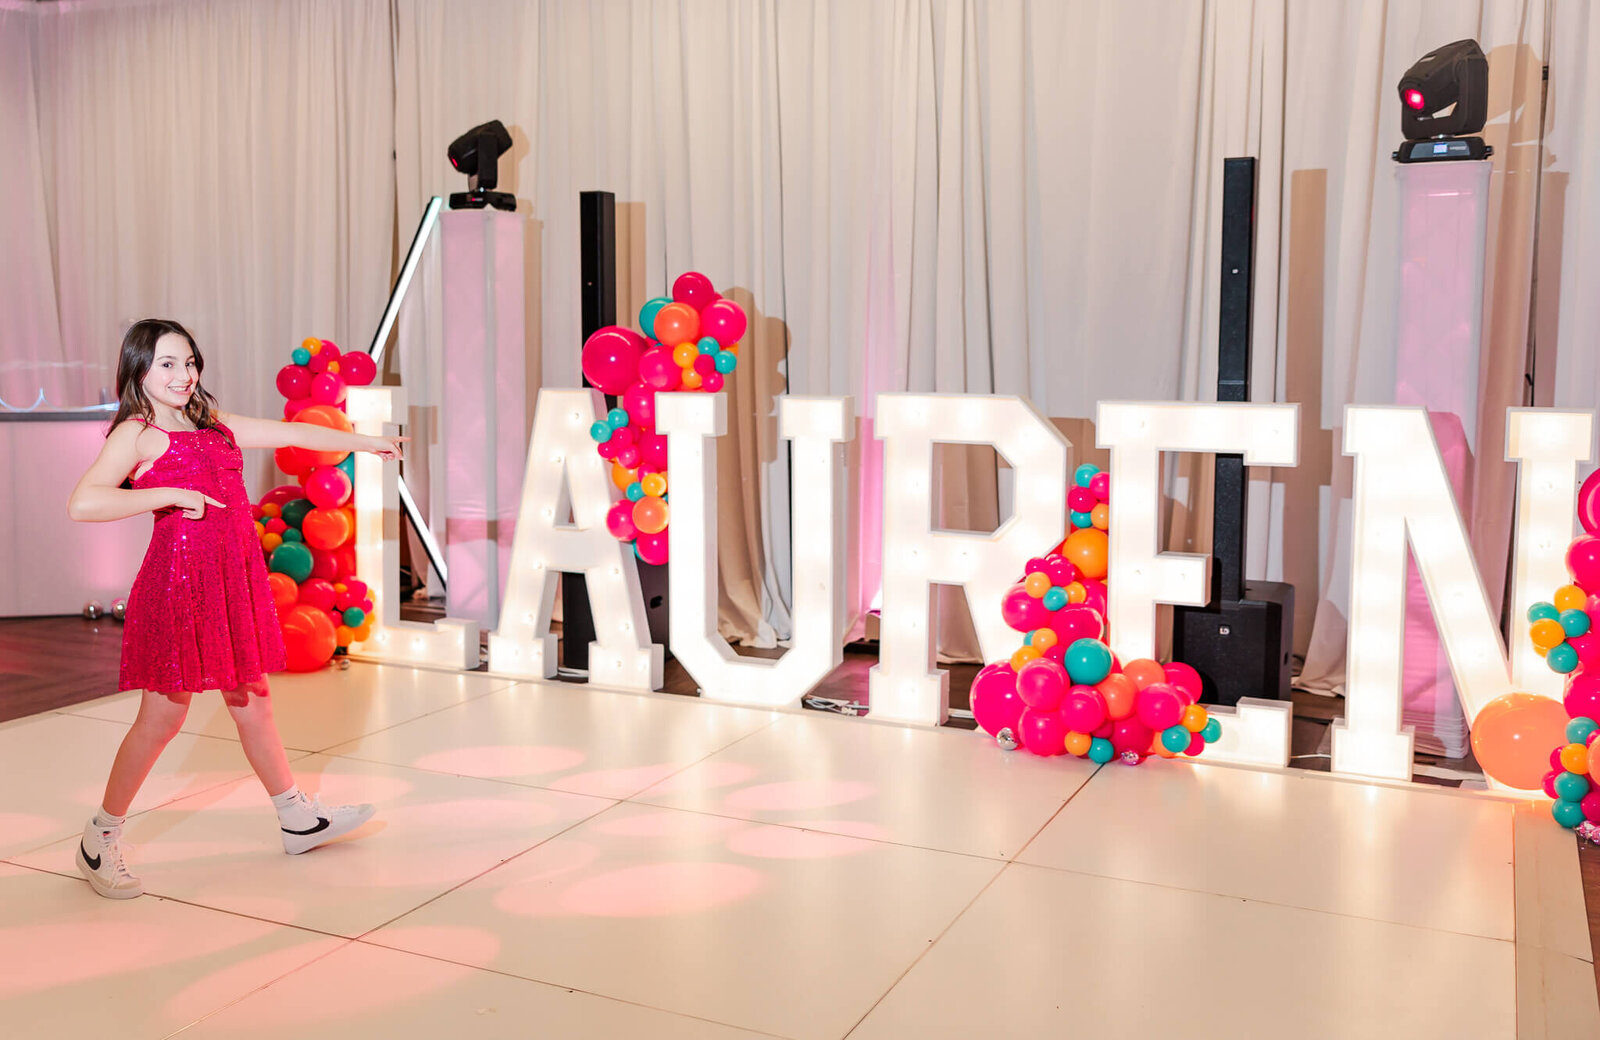 A teen girl in a bright pink dress points to her name in large light up letters on the dance floor during a Bellevue Bar and Bat Mitzvah Photography session